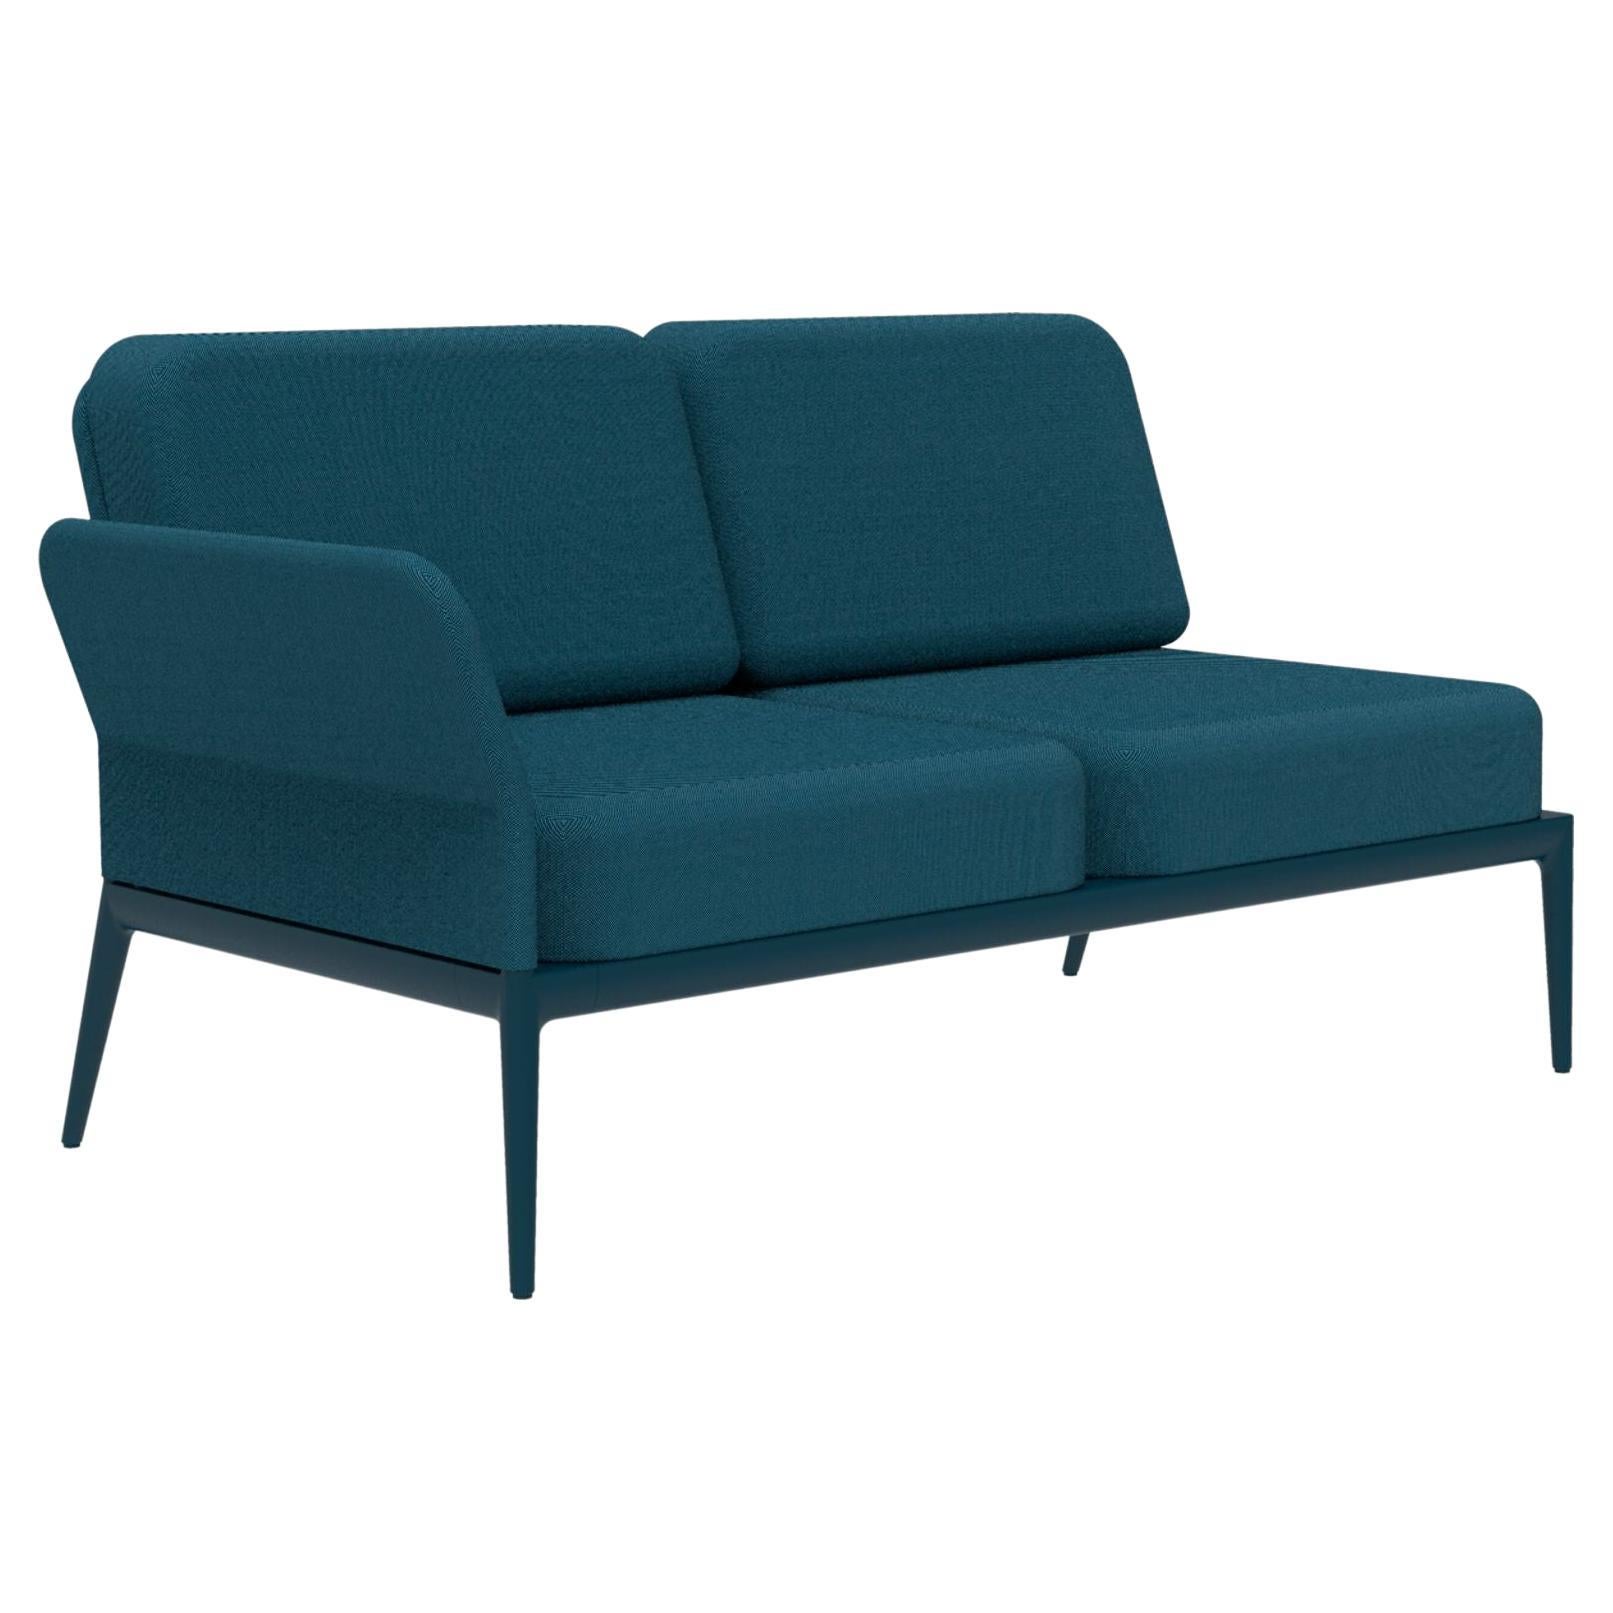 Cover Navy Double Right Modular Sofa by MOWEE